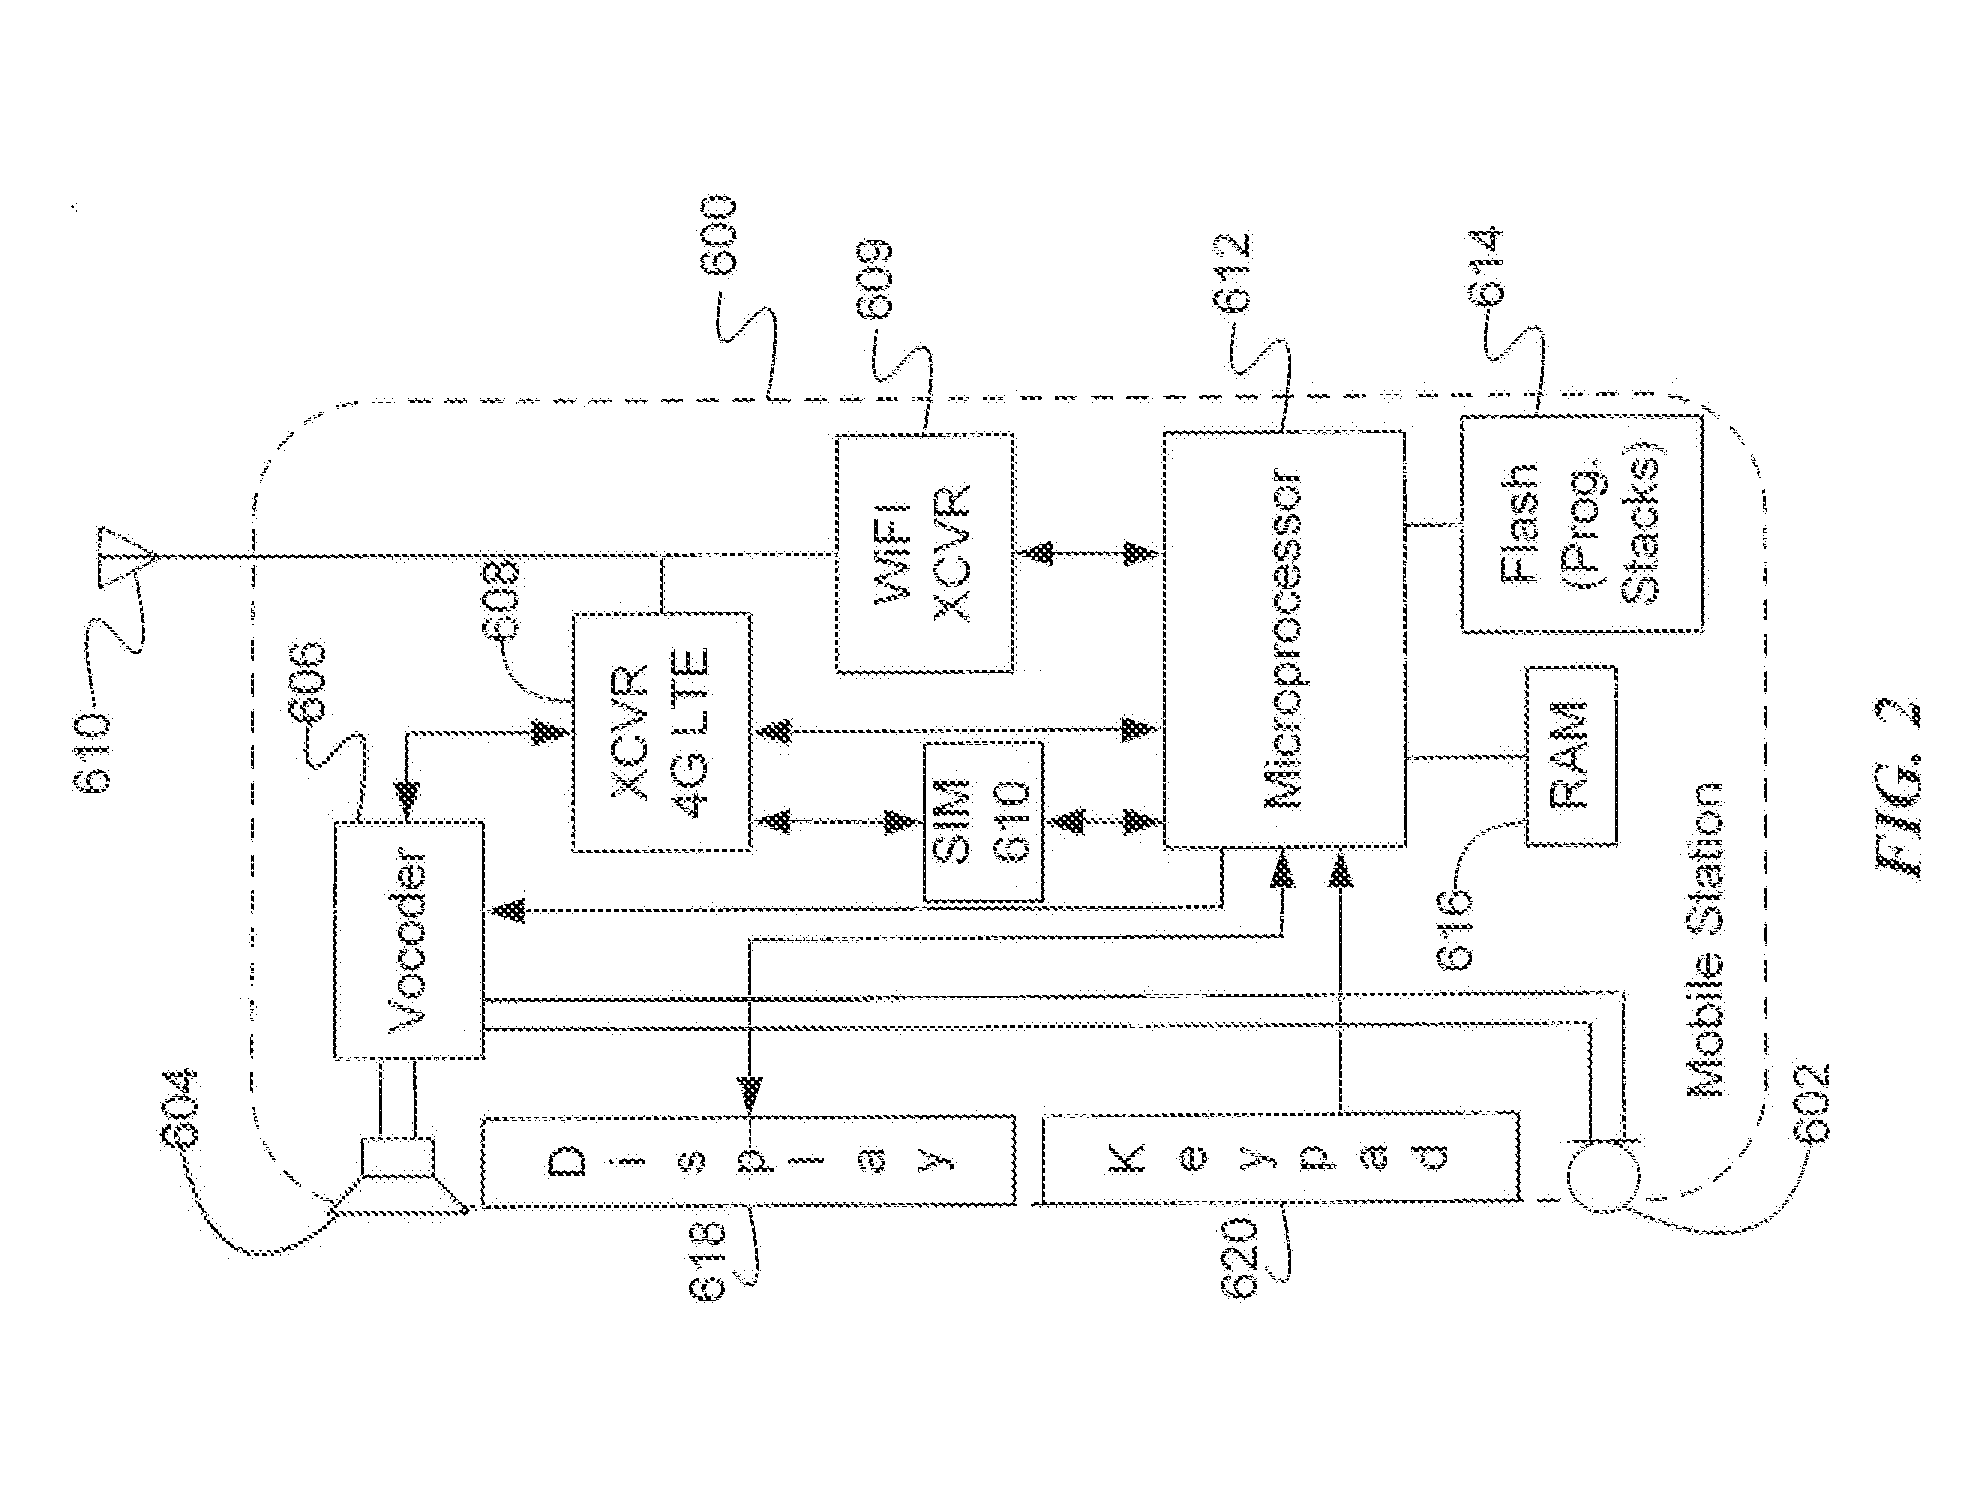 Method and apparatus for self-activating a mobile device